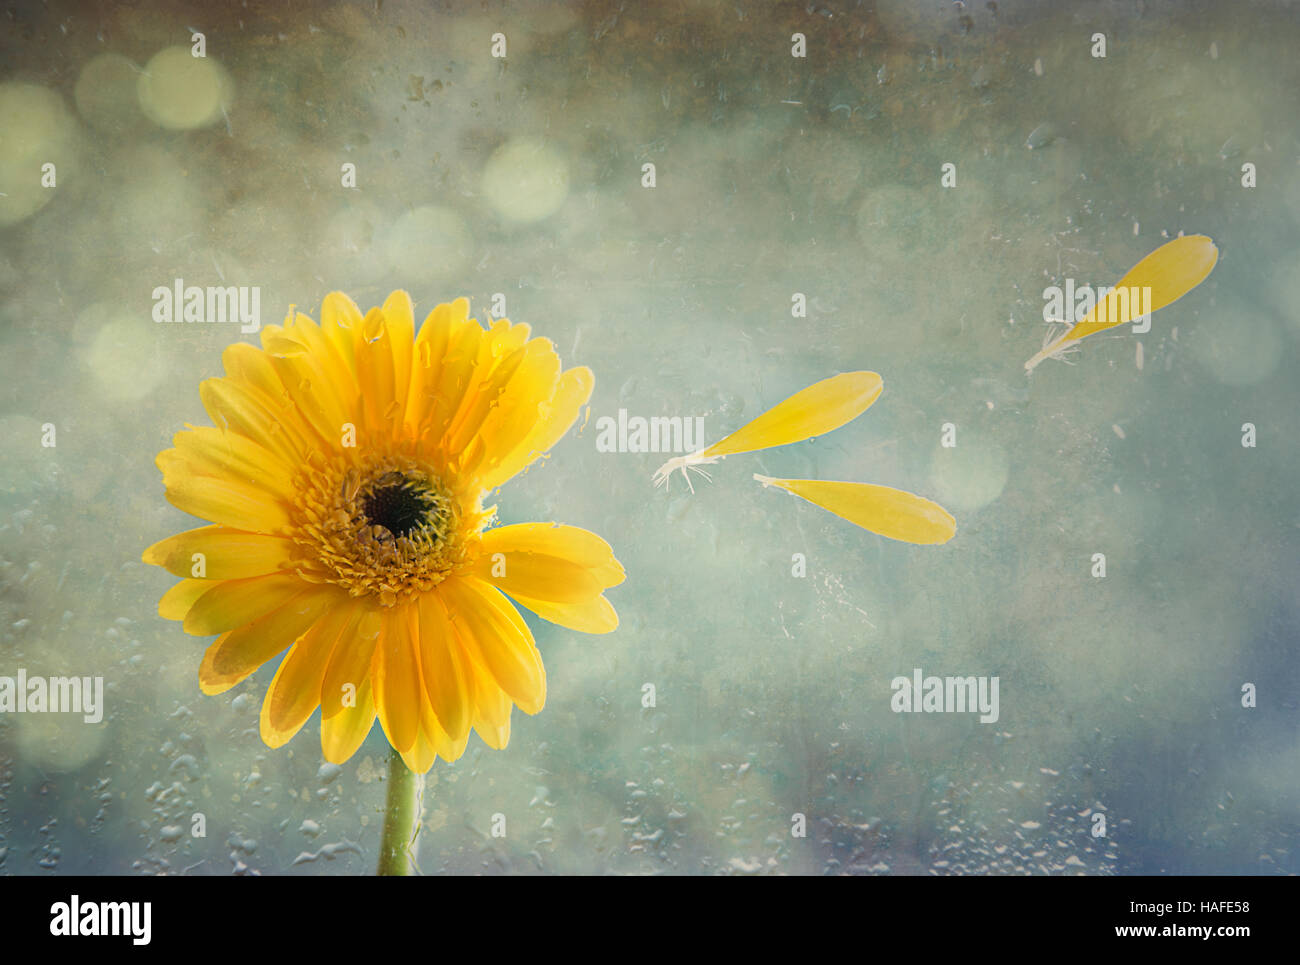 Gerbera flower with textured background and raindrops Stock Photo